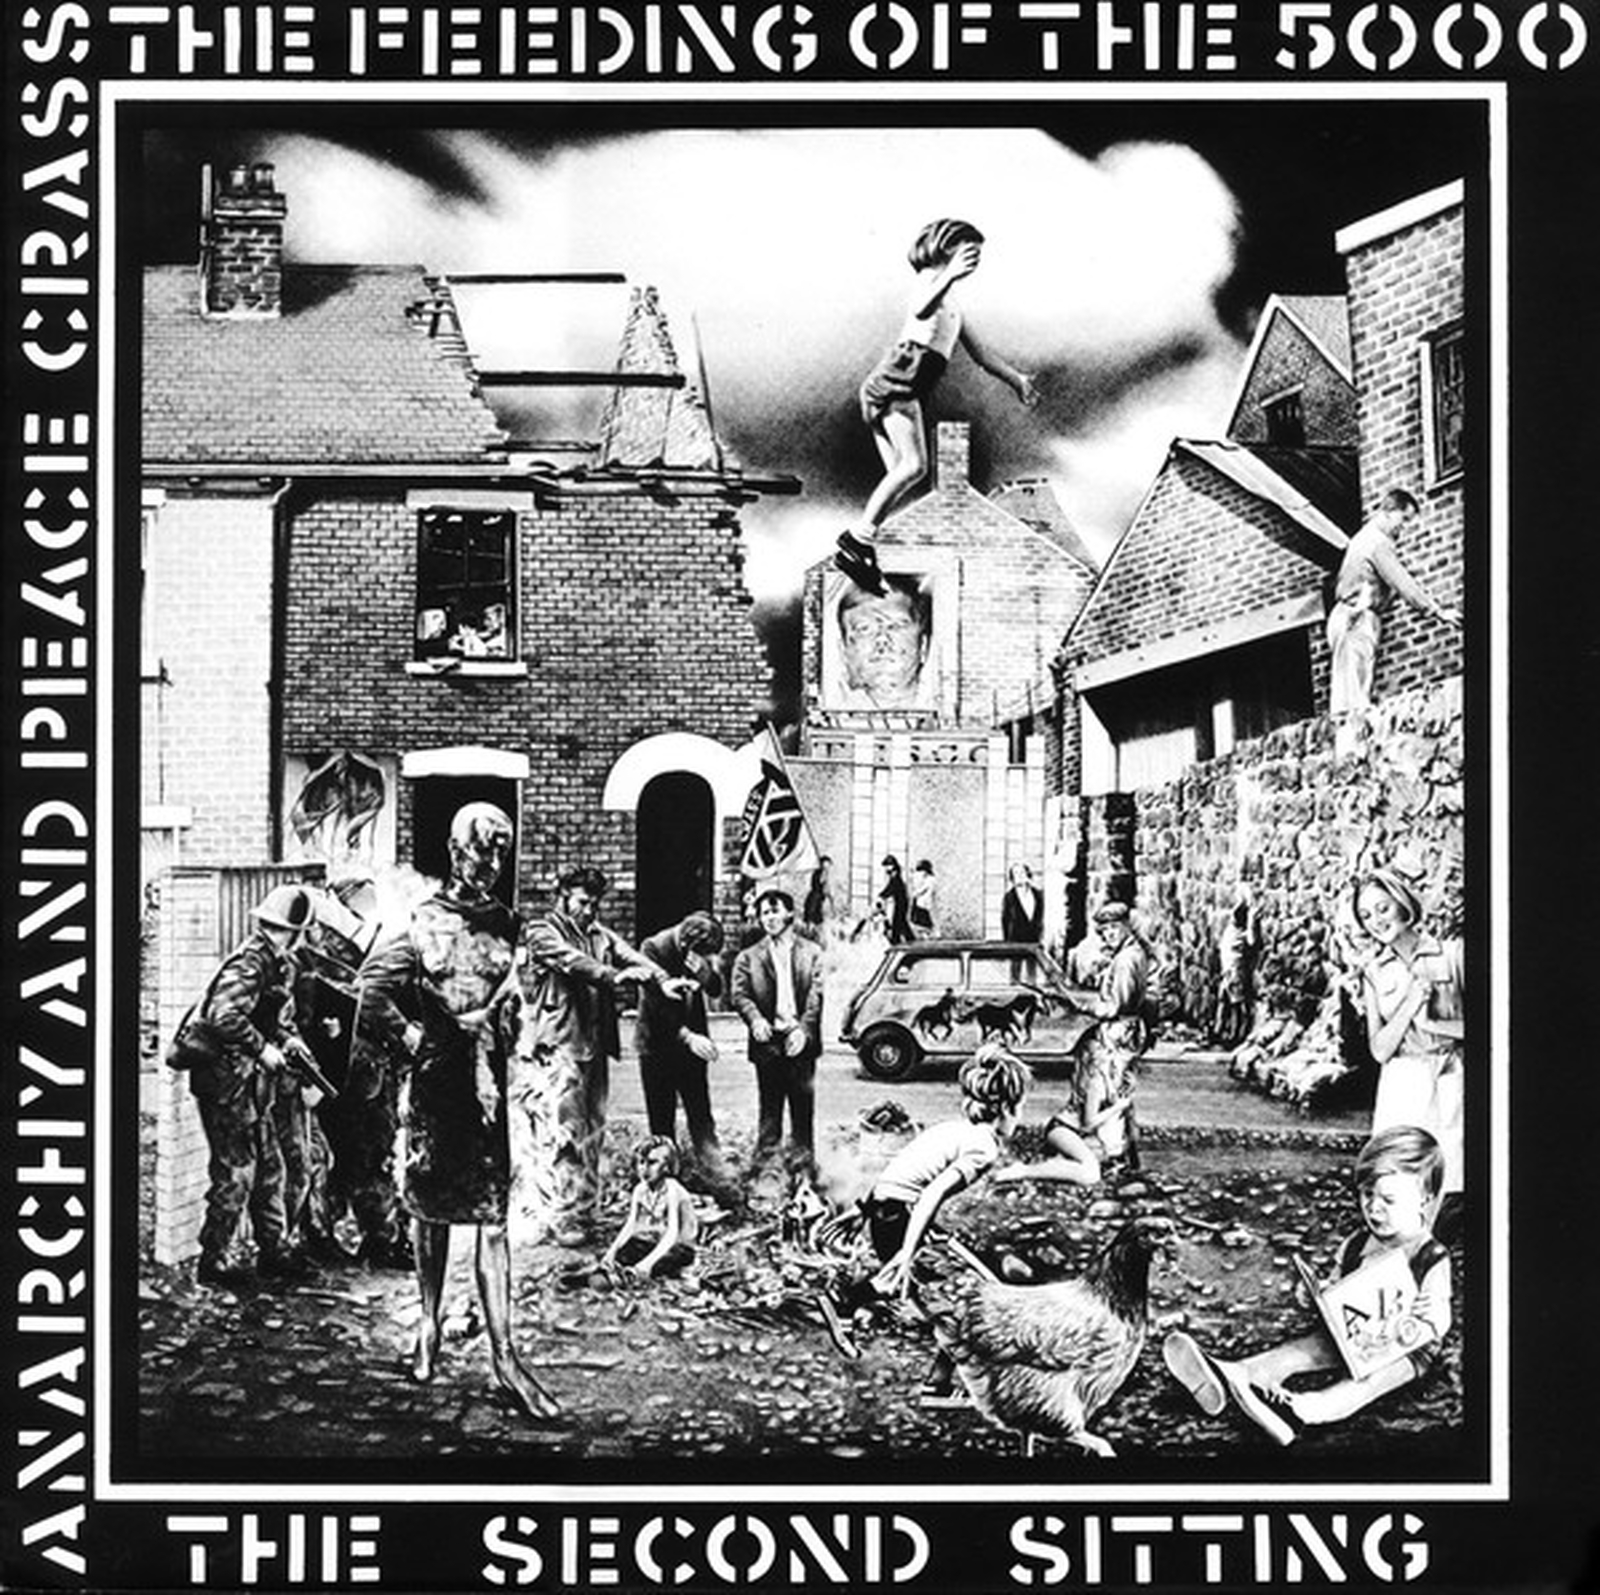 crass-the-feeding-of-the-5000the-second-sitting.jpg